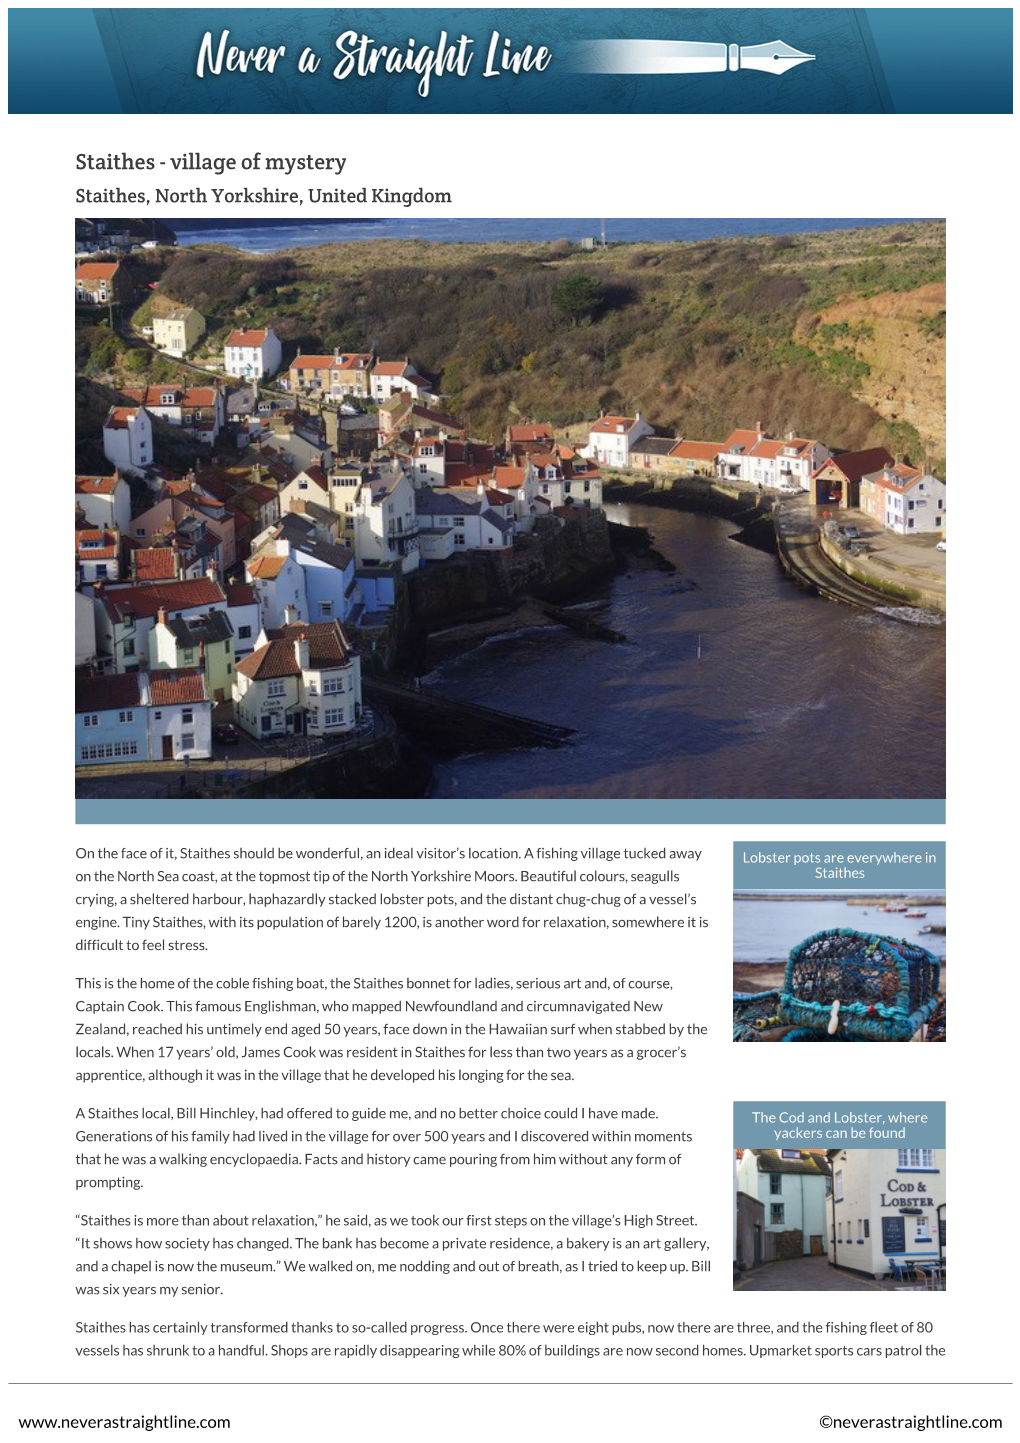 Staithes - Village of Mystery Staithes, North Yorkshire, United Kingdom